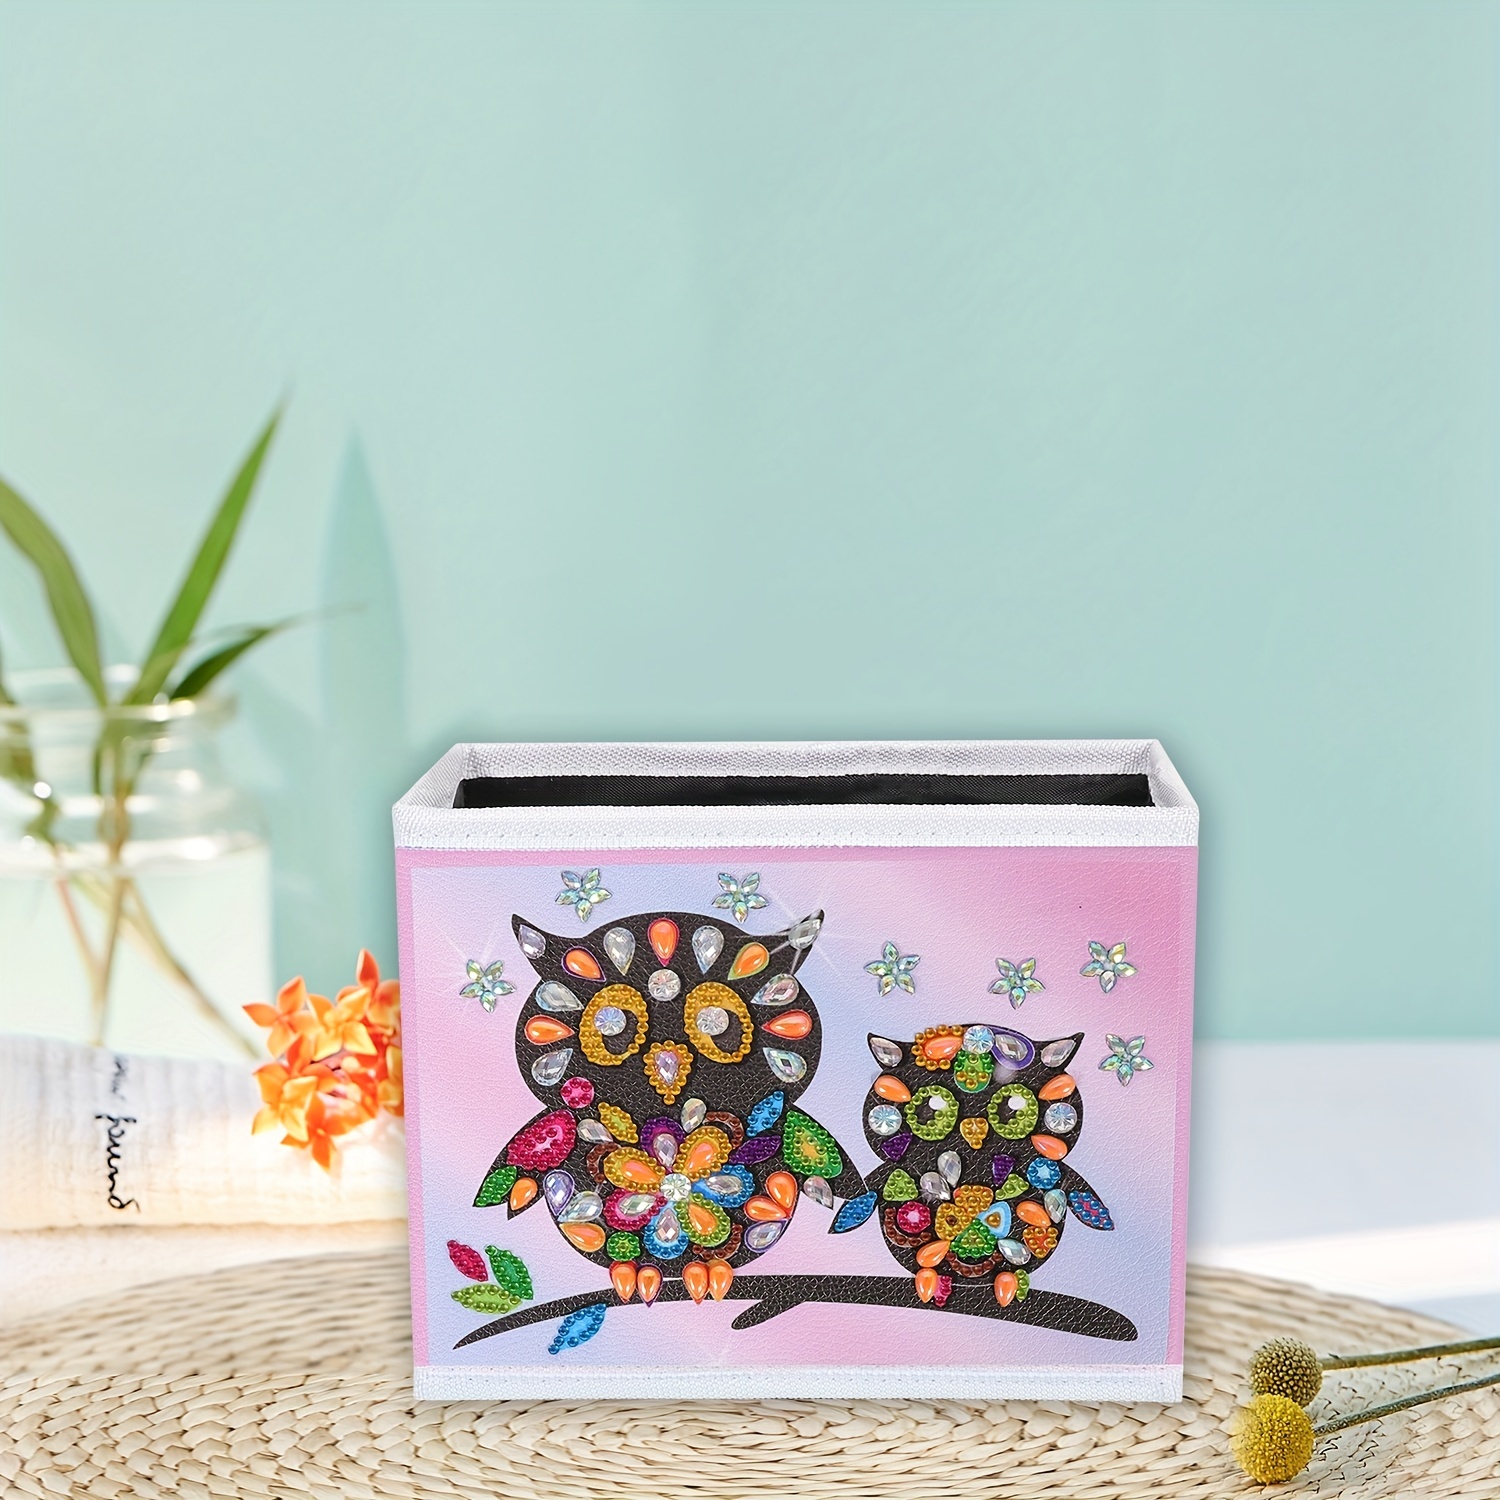 Wooden Embroidery Diamond Painting Accessories Storage Box 